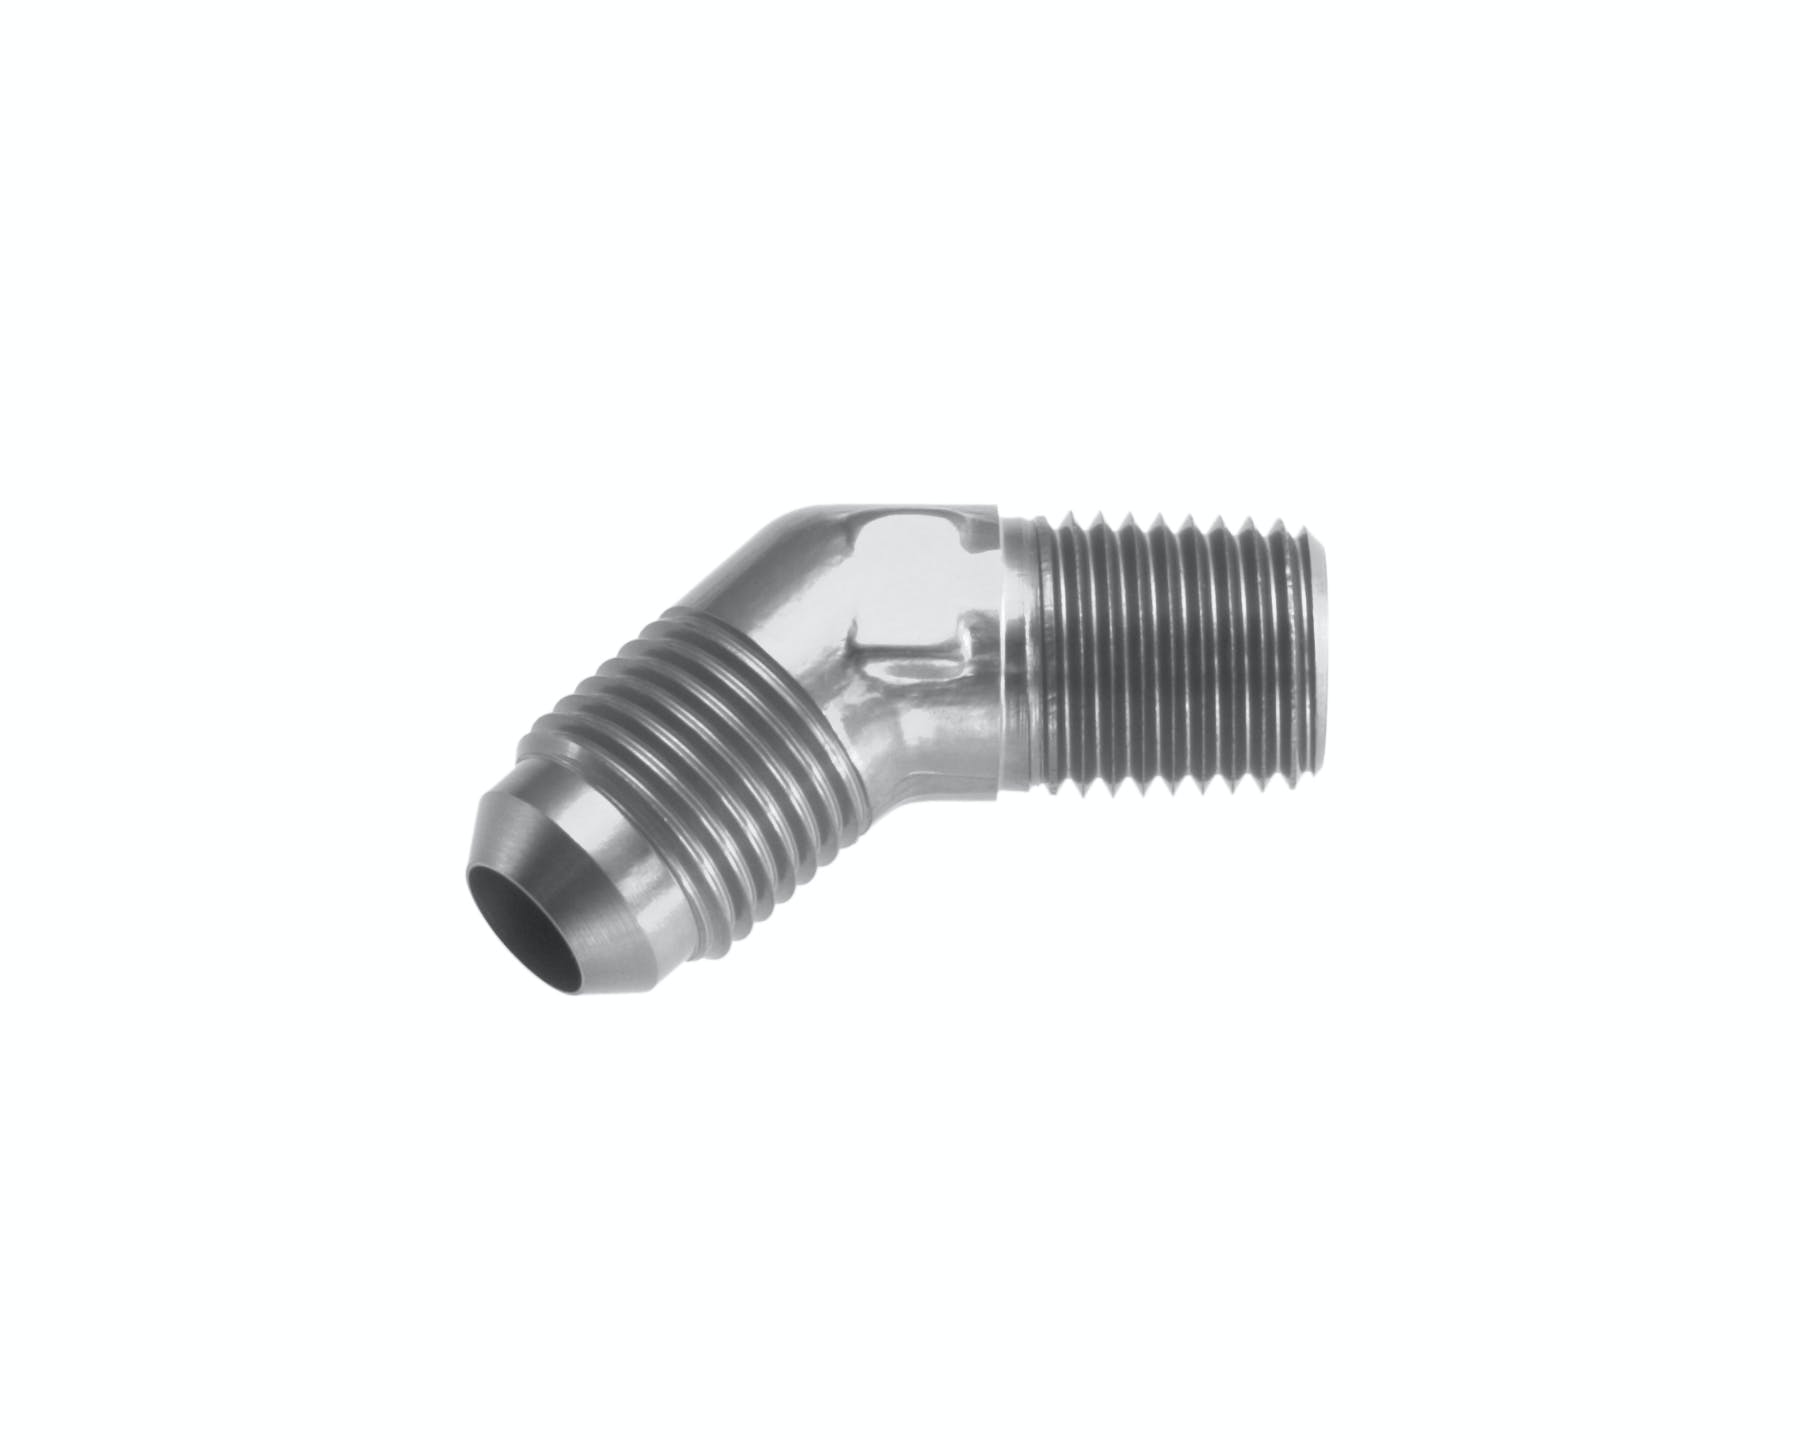 Redhorse Performance 823-03-04-5 -03 45 degree Male adapter to -04 (1/4in) NPT Male - clear